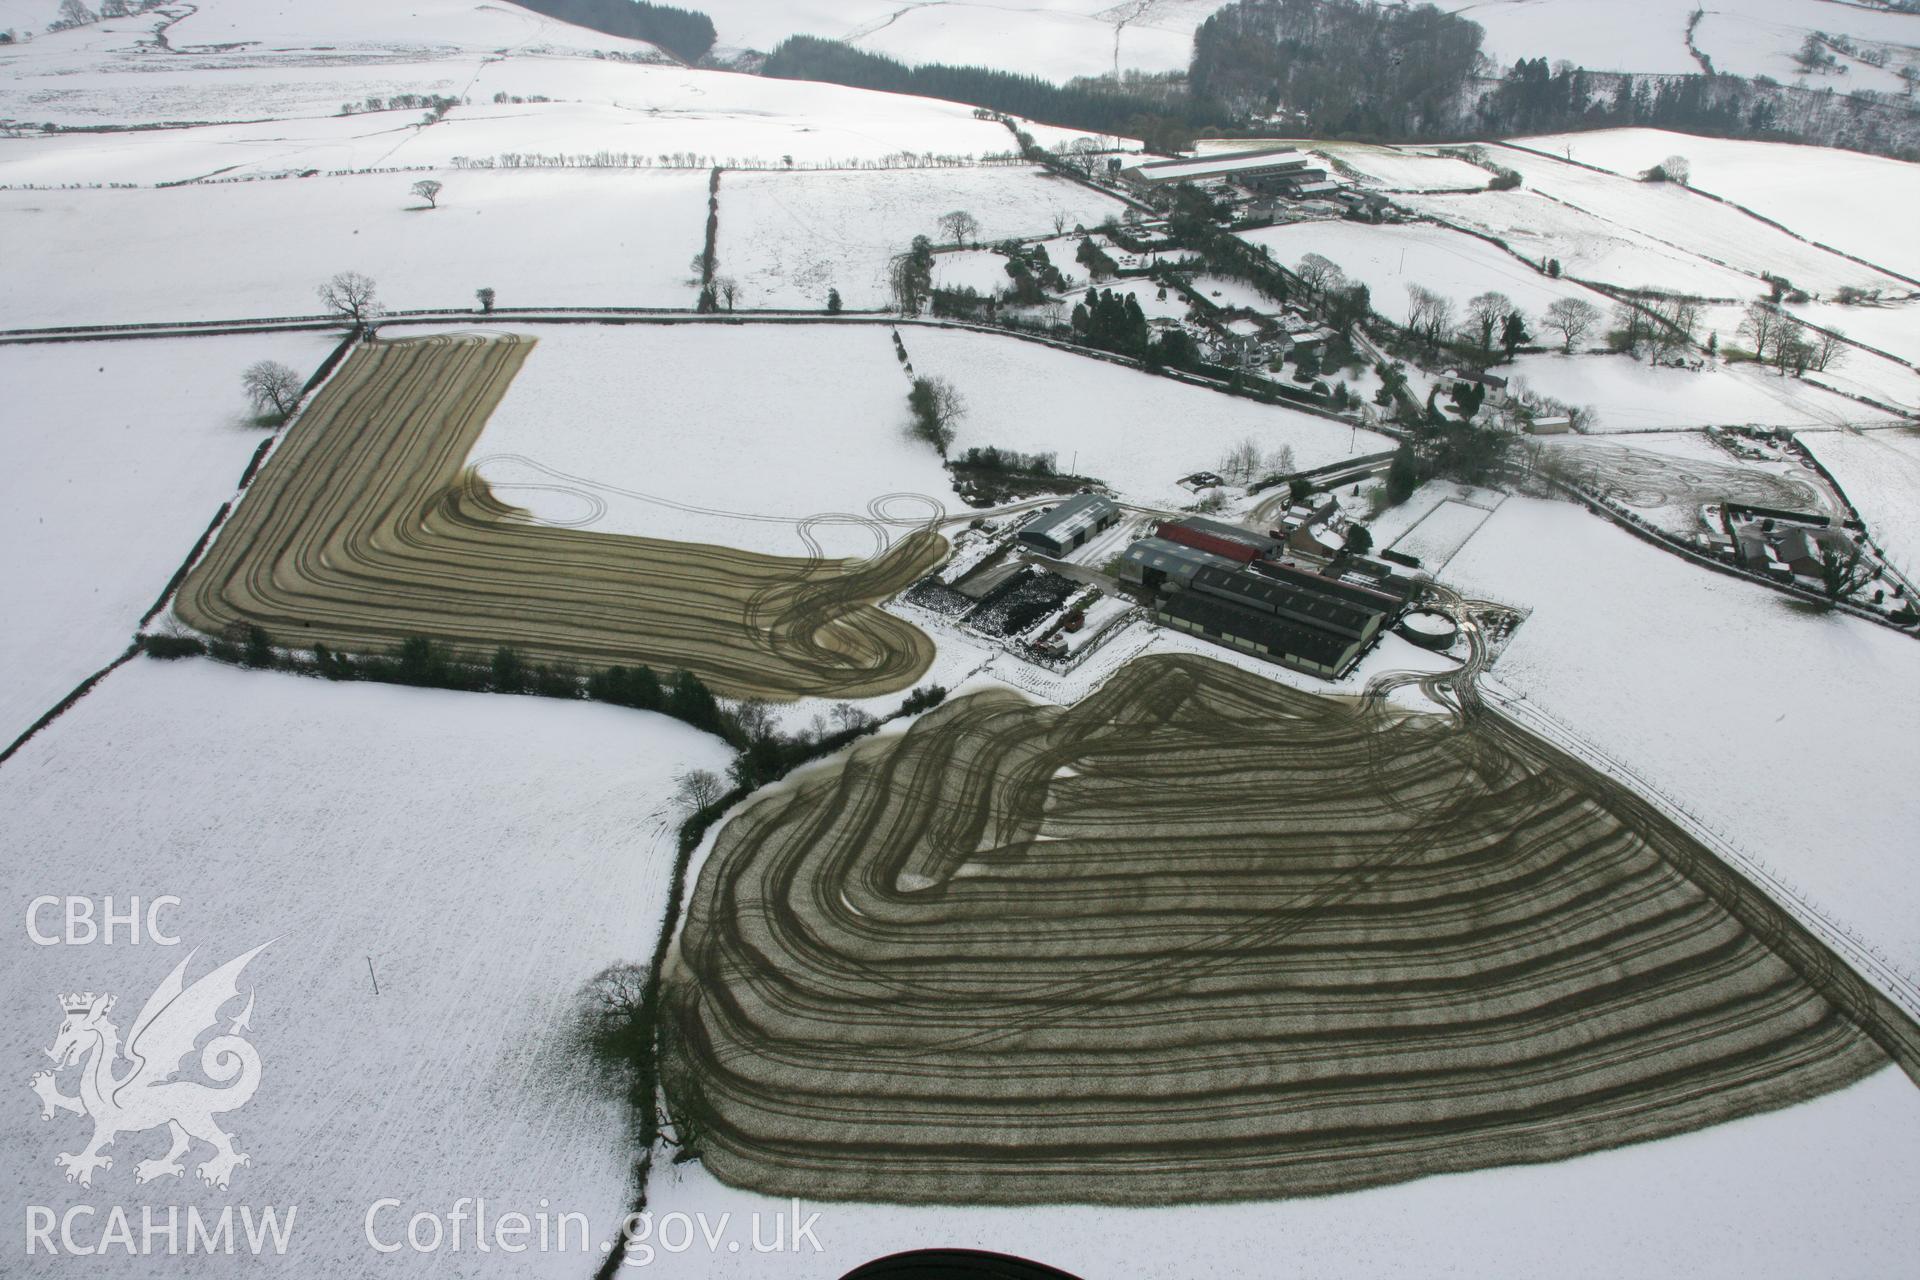 RCAHMW colour oblique aerial photograph of Llidiart-Fawr Farm, with slurry spreading on winter fields. Taken on 06 March 2006 by Toby Driver.